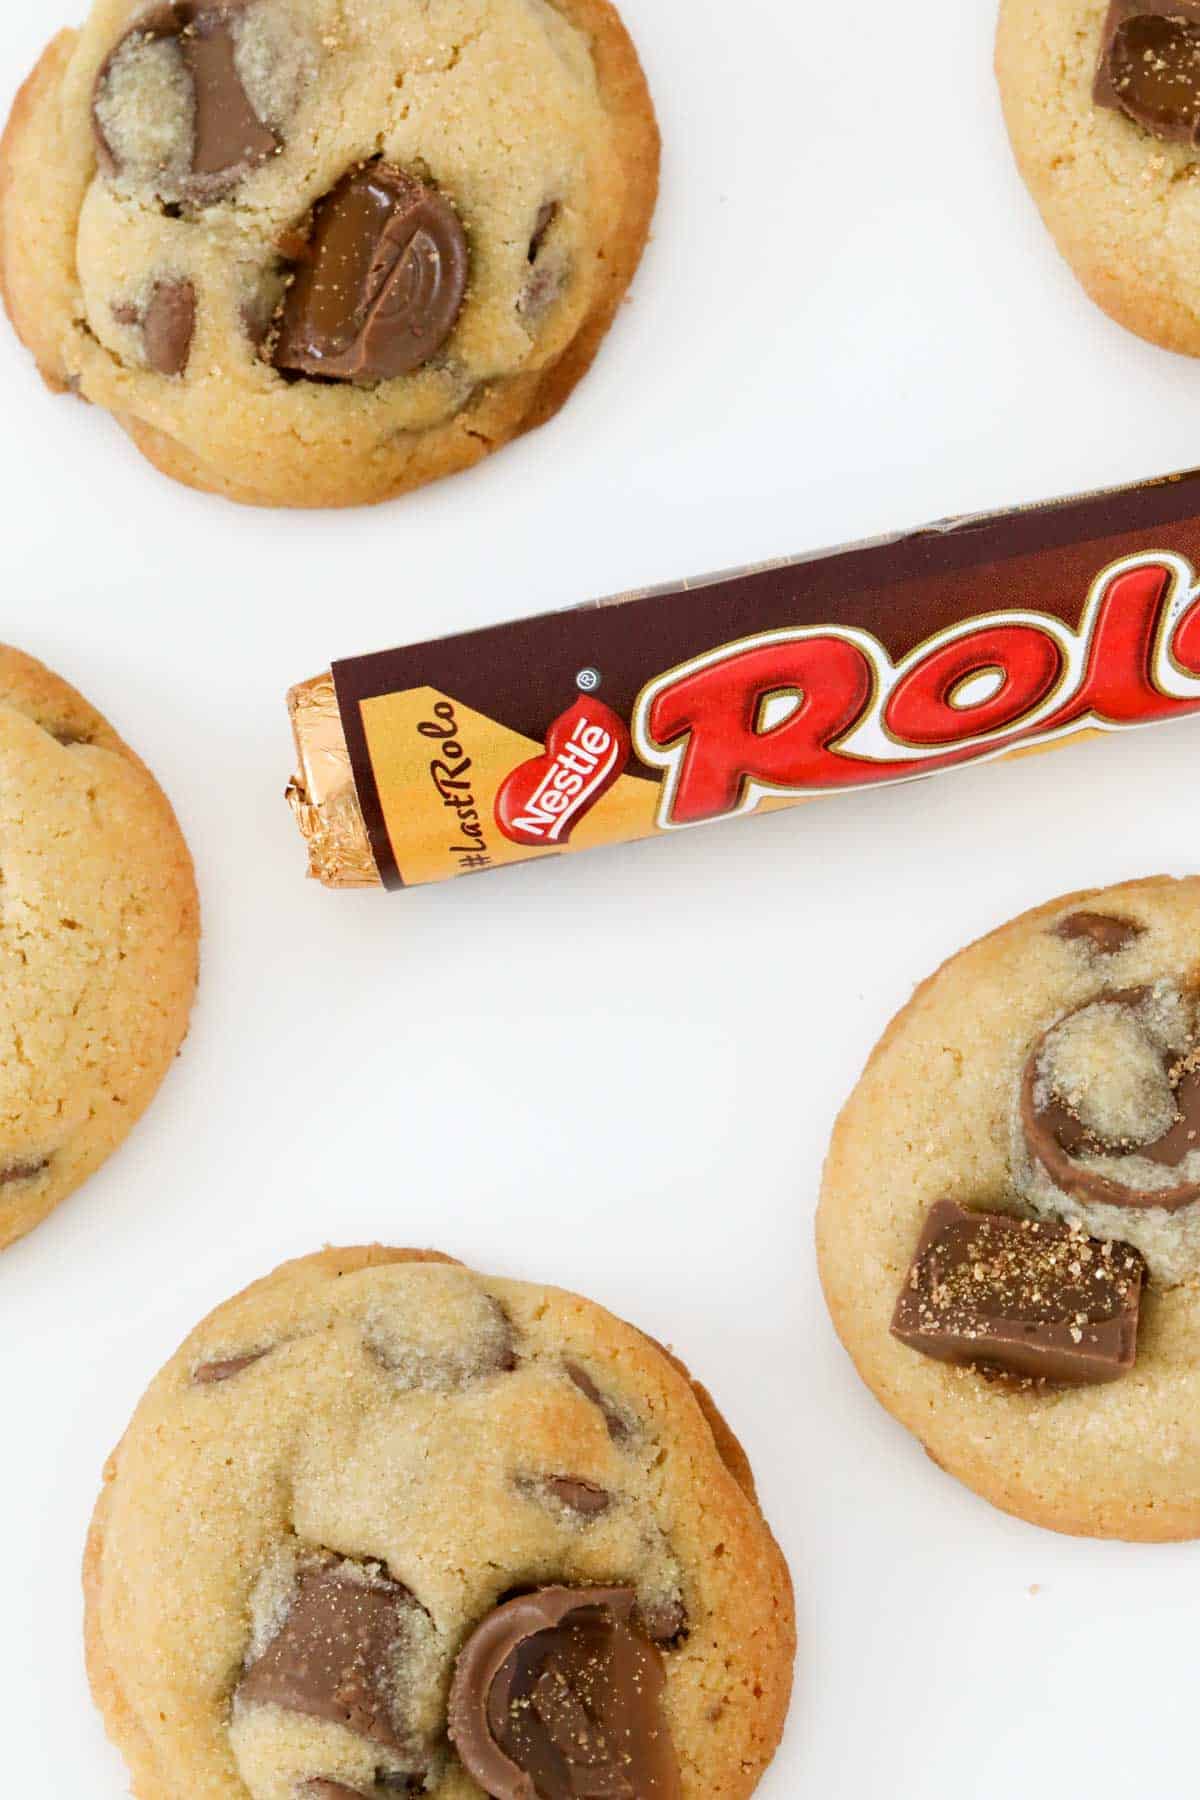 A Rolo chocolate bar next to chocolate chip cookies.